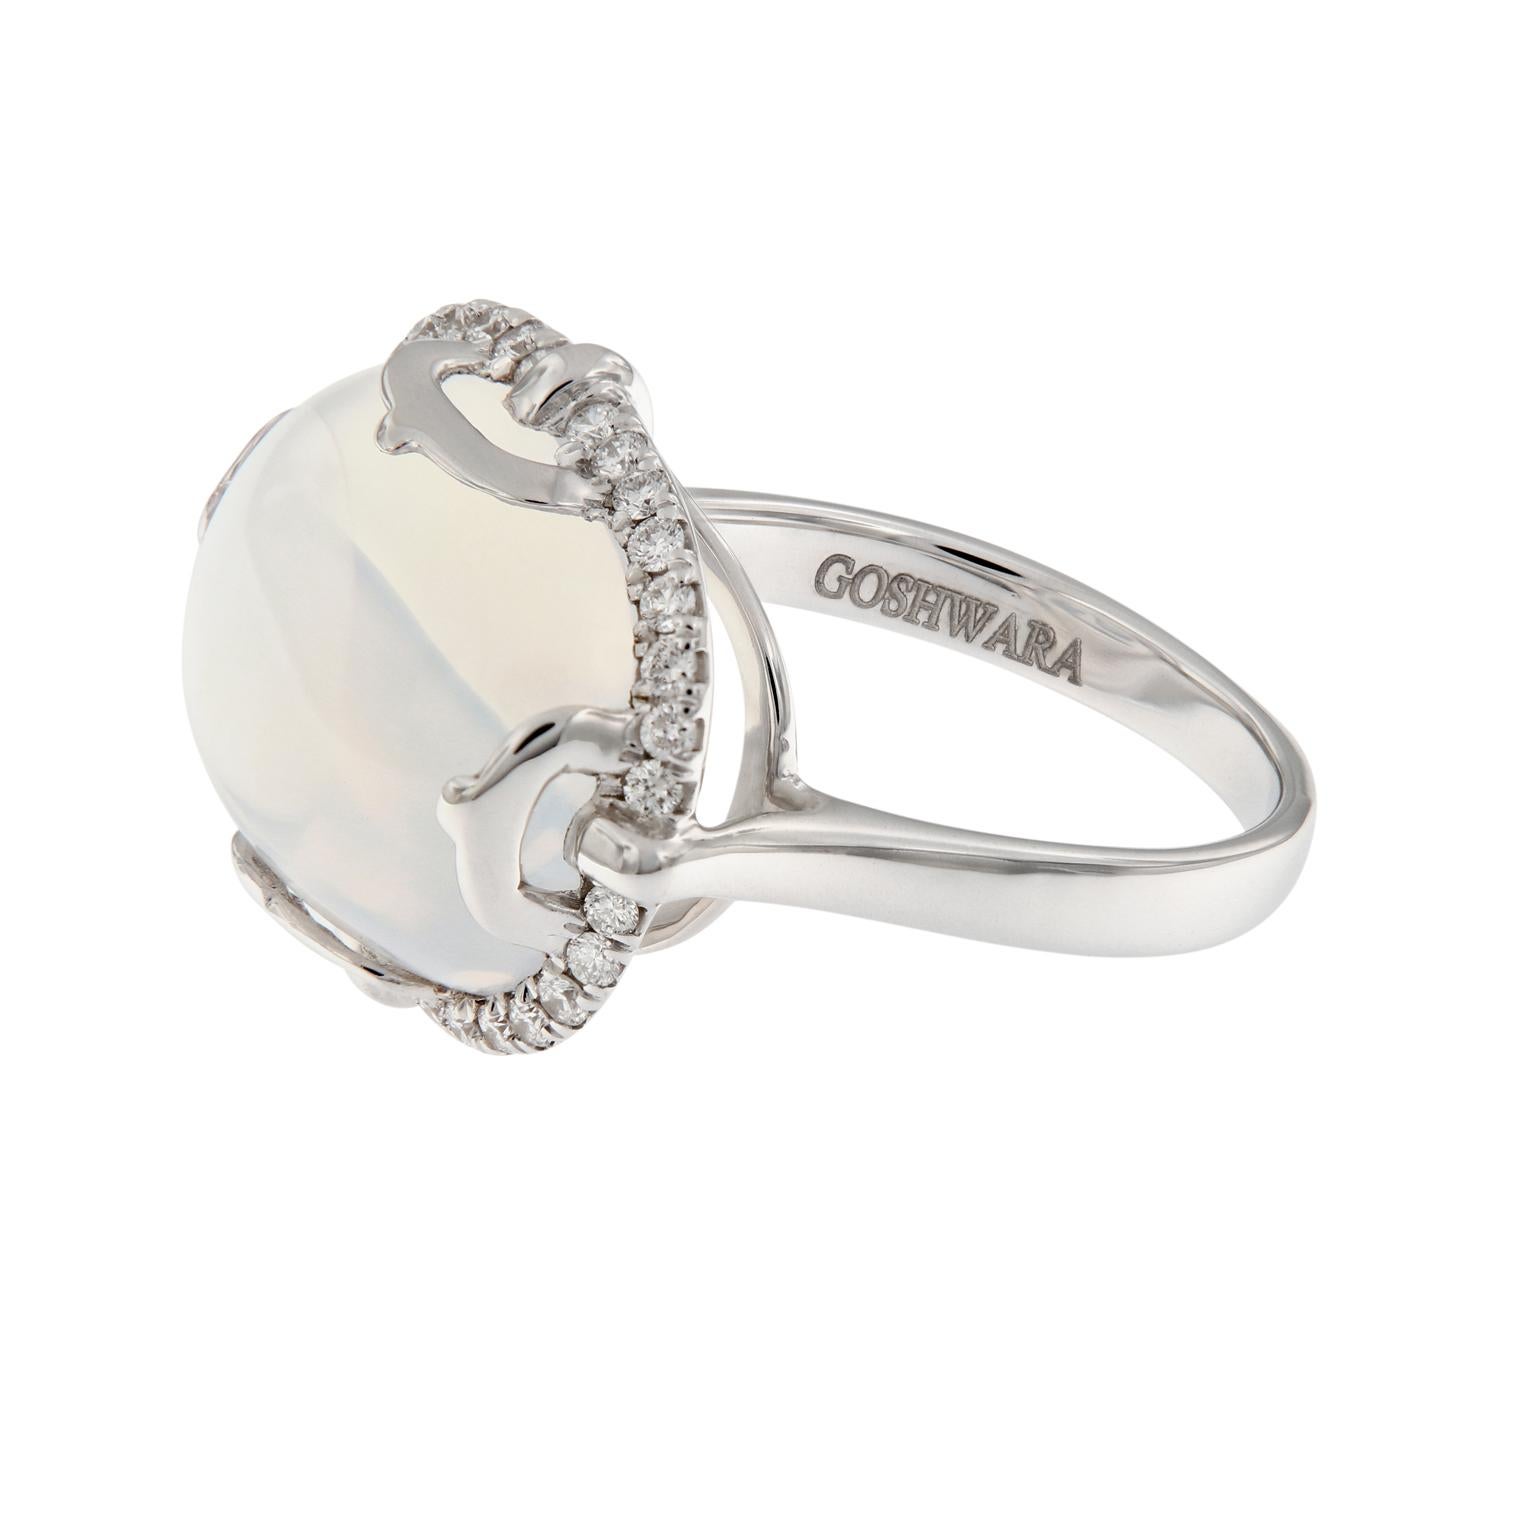 This ring centers around a 13.59 carat cabochon moon quartz and is surrounded with diamonds and crafted in 18k white gold. The ring is from the Rock-N-Roll Collection designed by Goshwara. Top of ring measures 17 mm x 21 mm. Ring size 6.75. Weighs